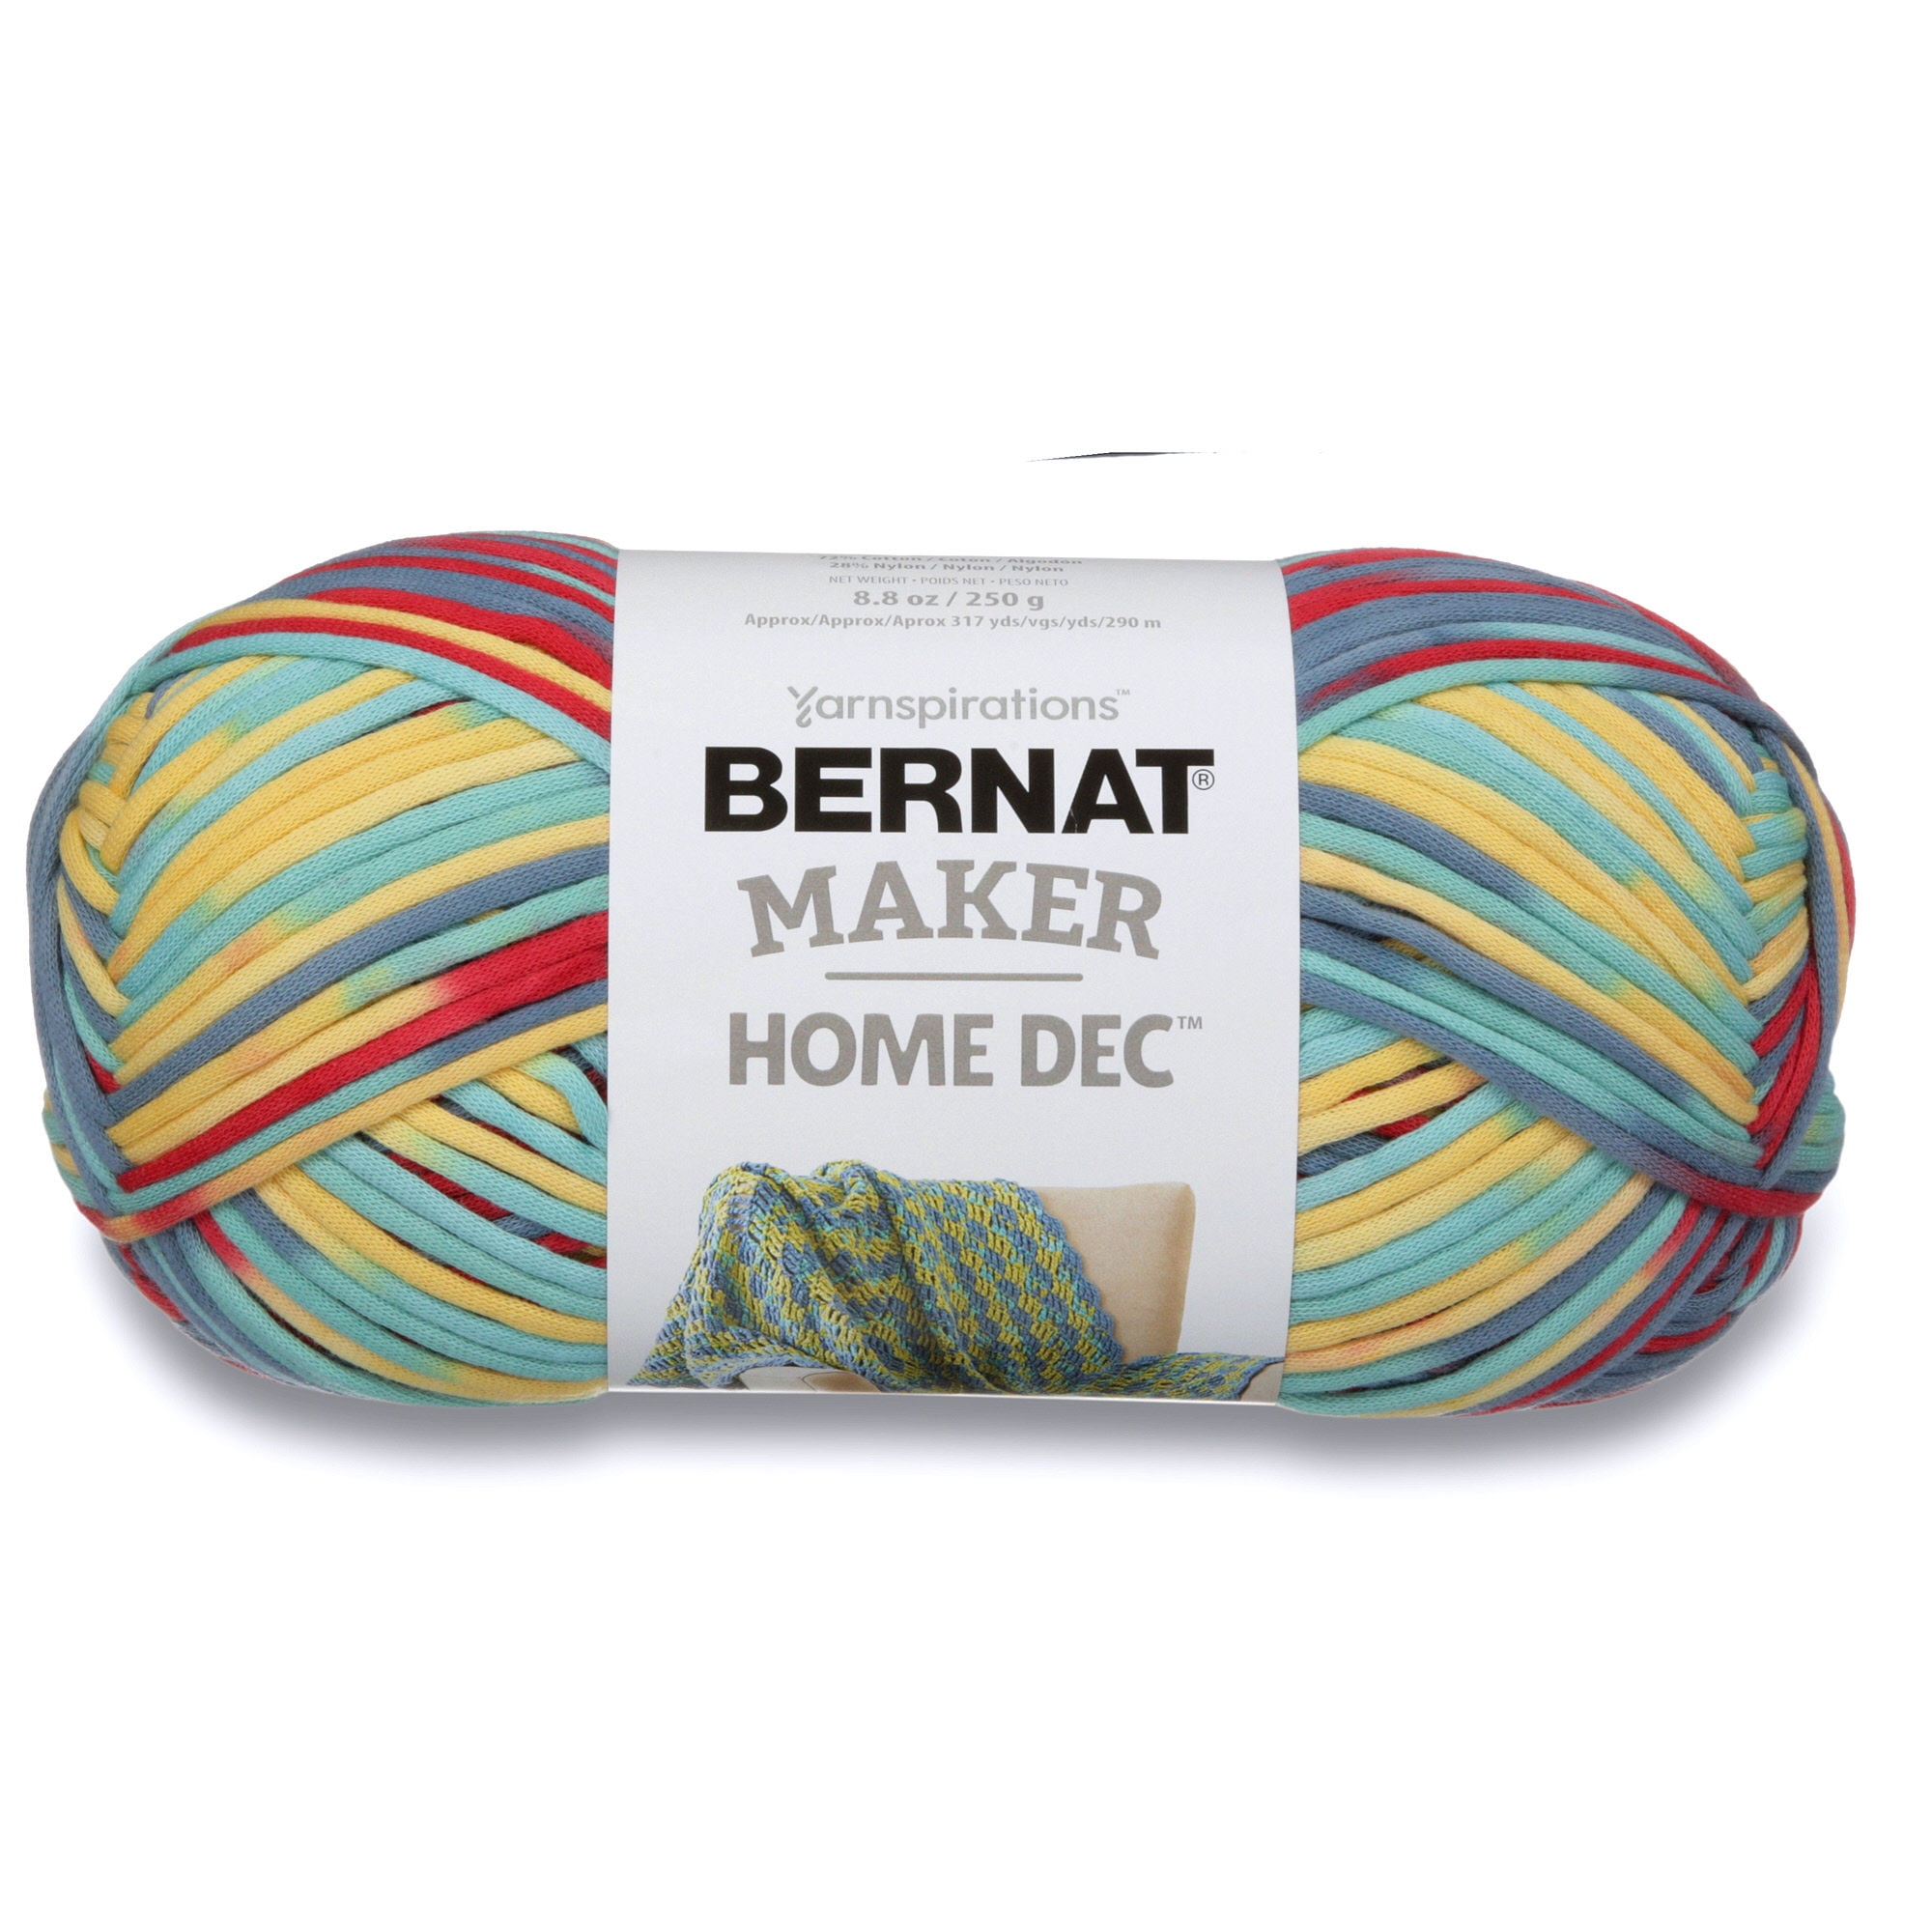 Bernat Maker Home Dec: Yarn Love Review and Giveaway - Moogly